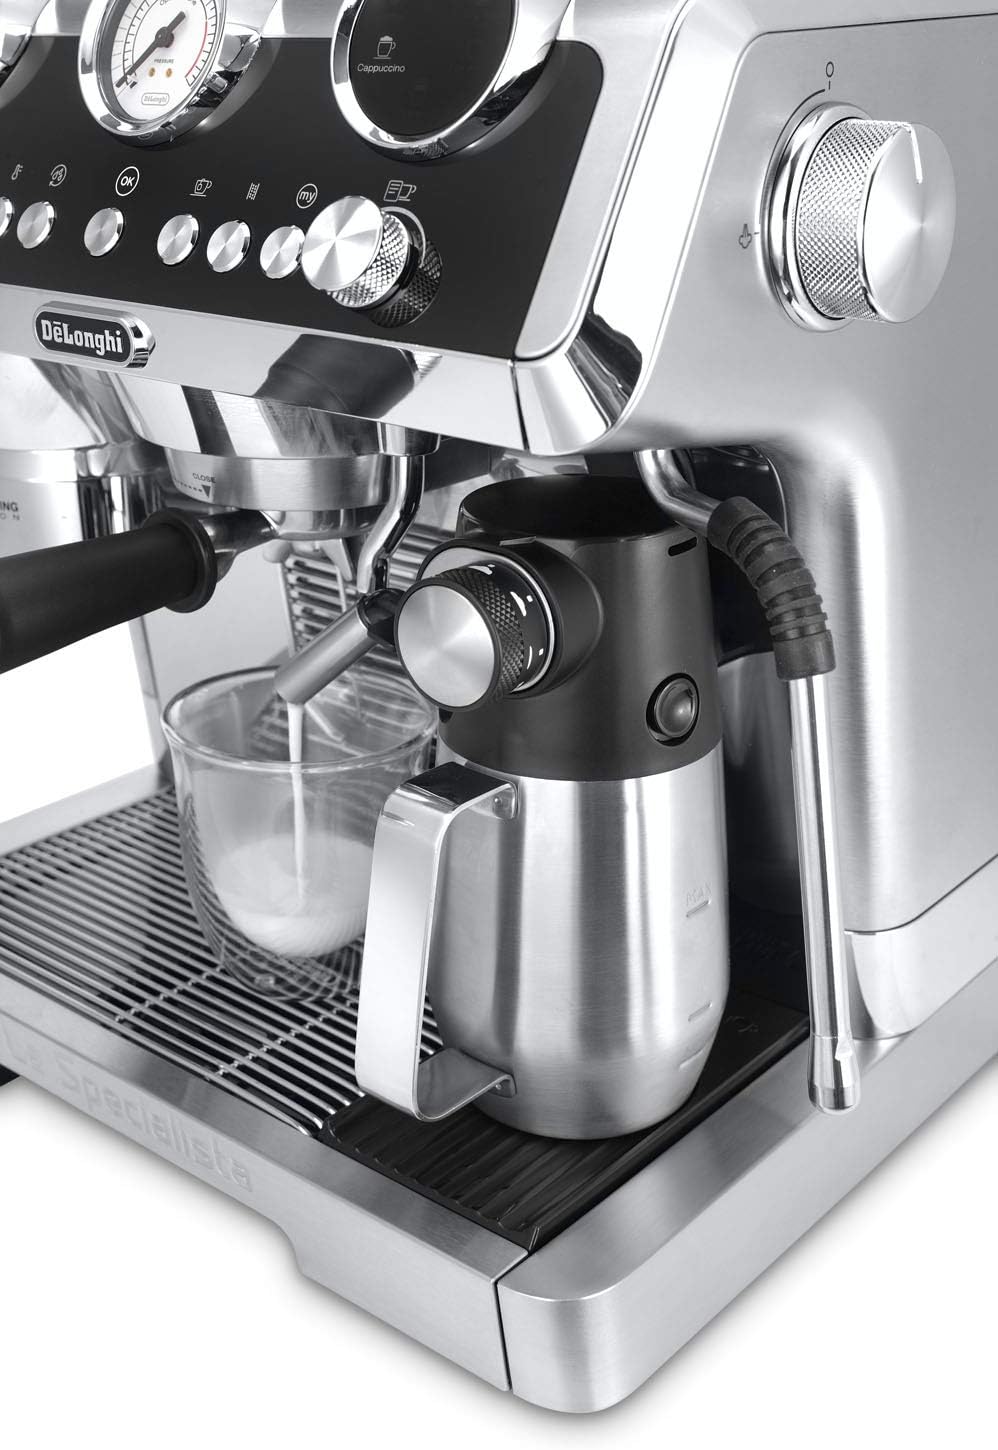 De'Longhi La Specialista Maestro, Pump Espresso Coffee Machine, With Sensor Grinding Technology, Smart Tamping Station, Pre Infusion, Manual and Automatic Milk Frothing Options, EC9665.M (Silver)